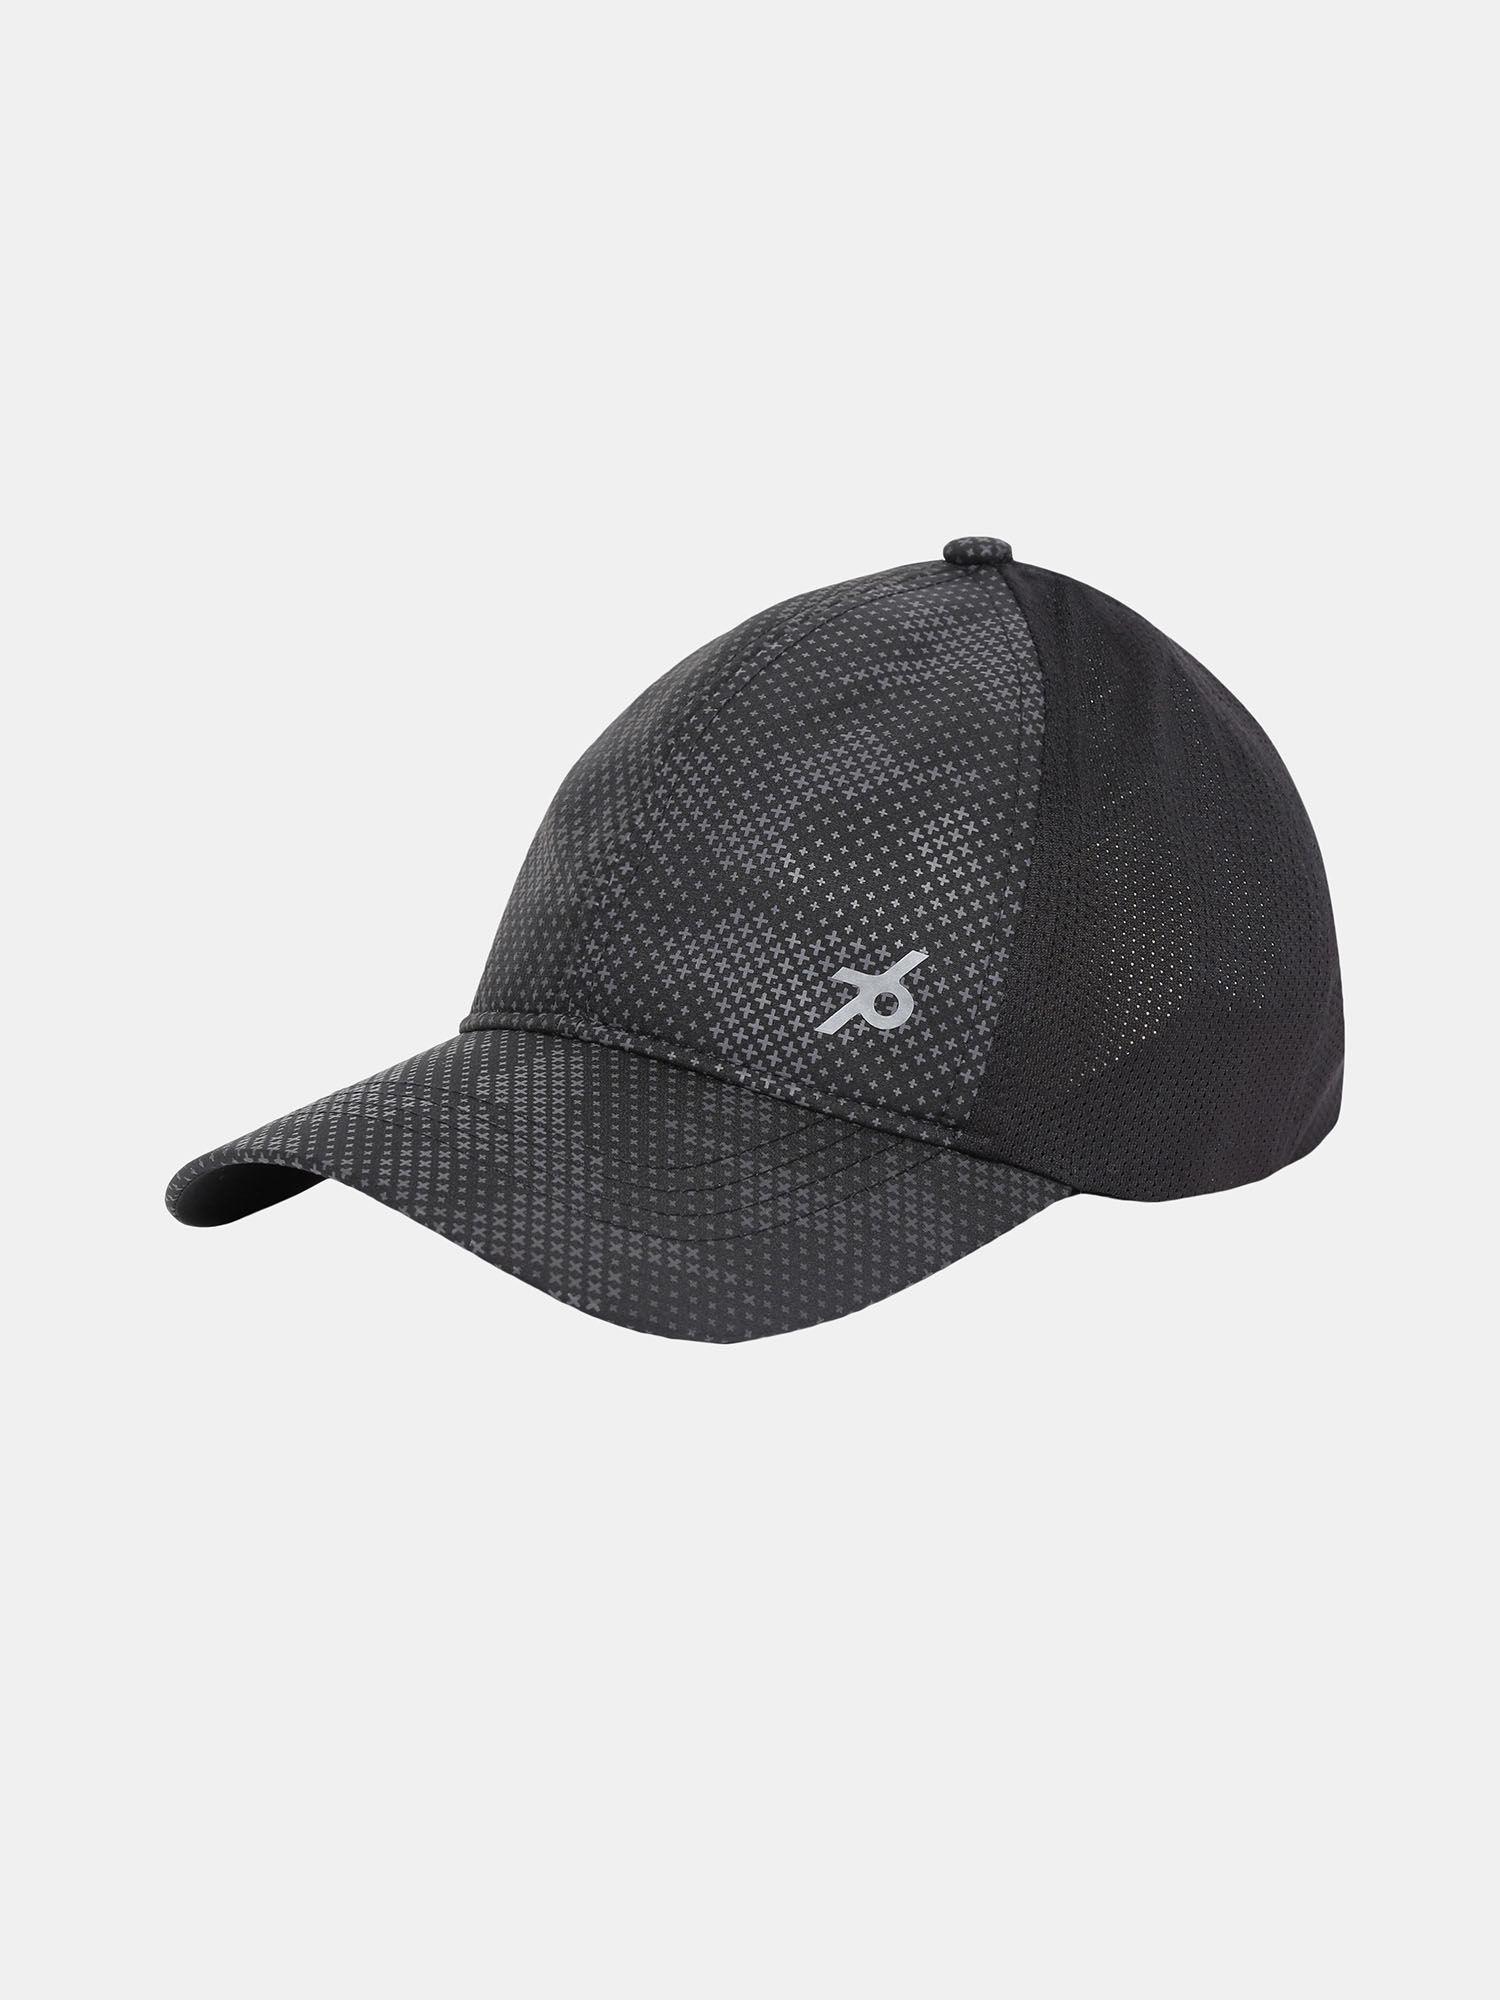 cp23-polyester-printed-cap-with-adjustable-back-closure-and-stay-dry-black